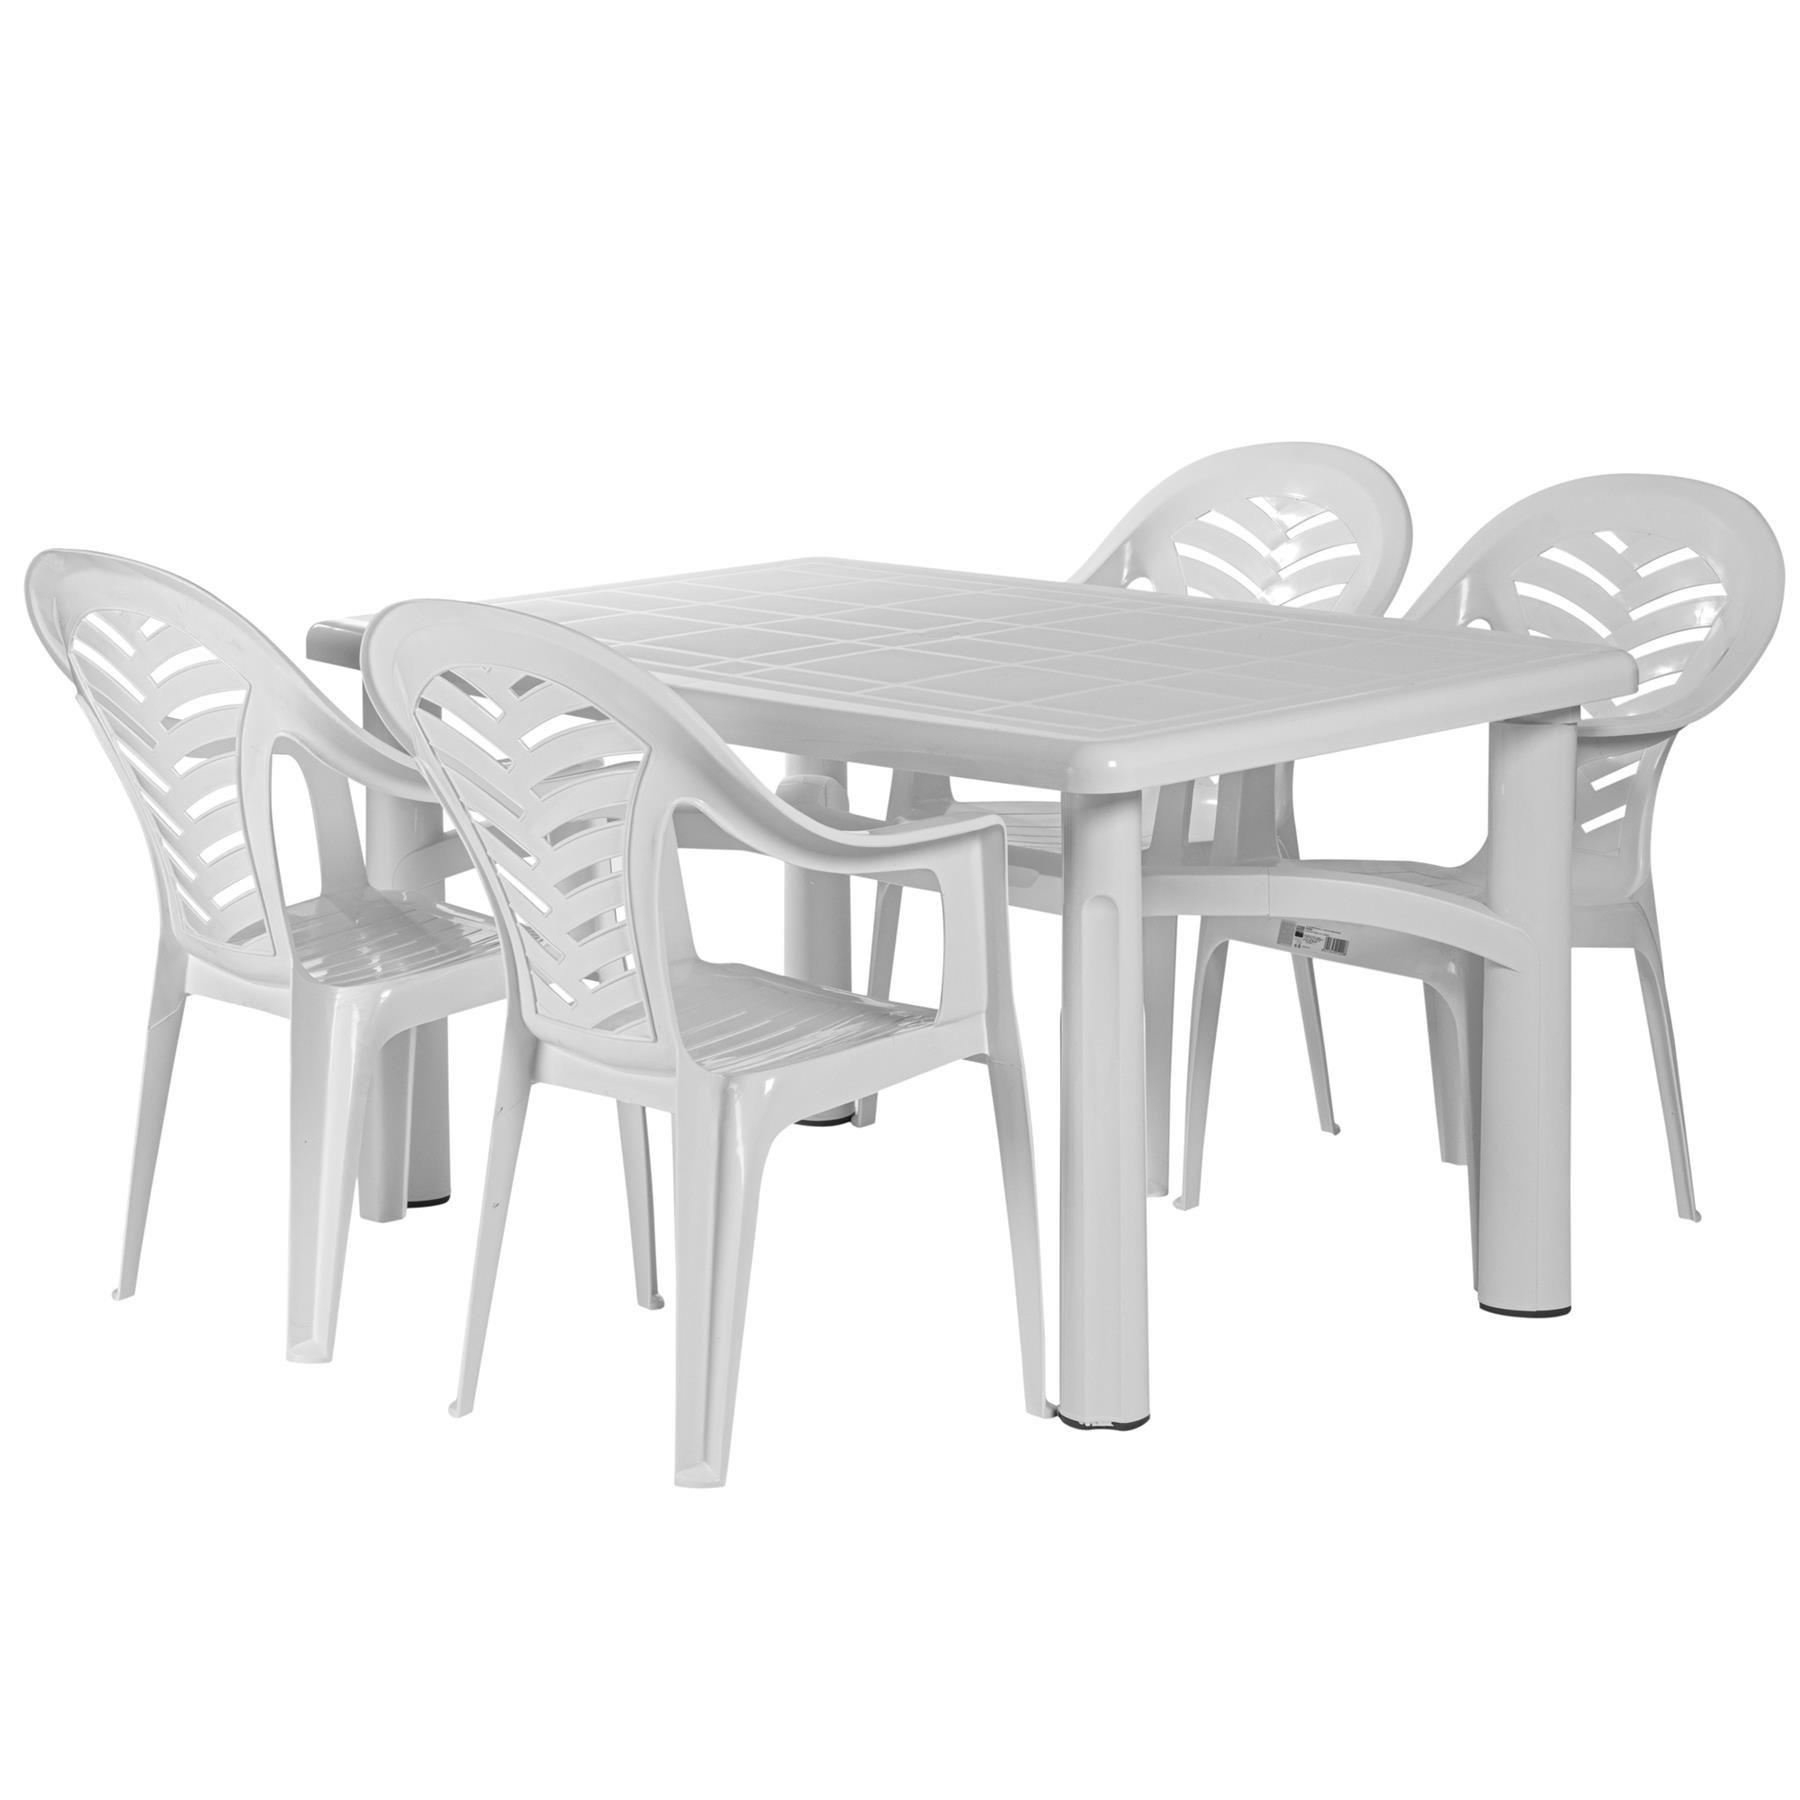 Olot 4 Seater Dining Set